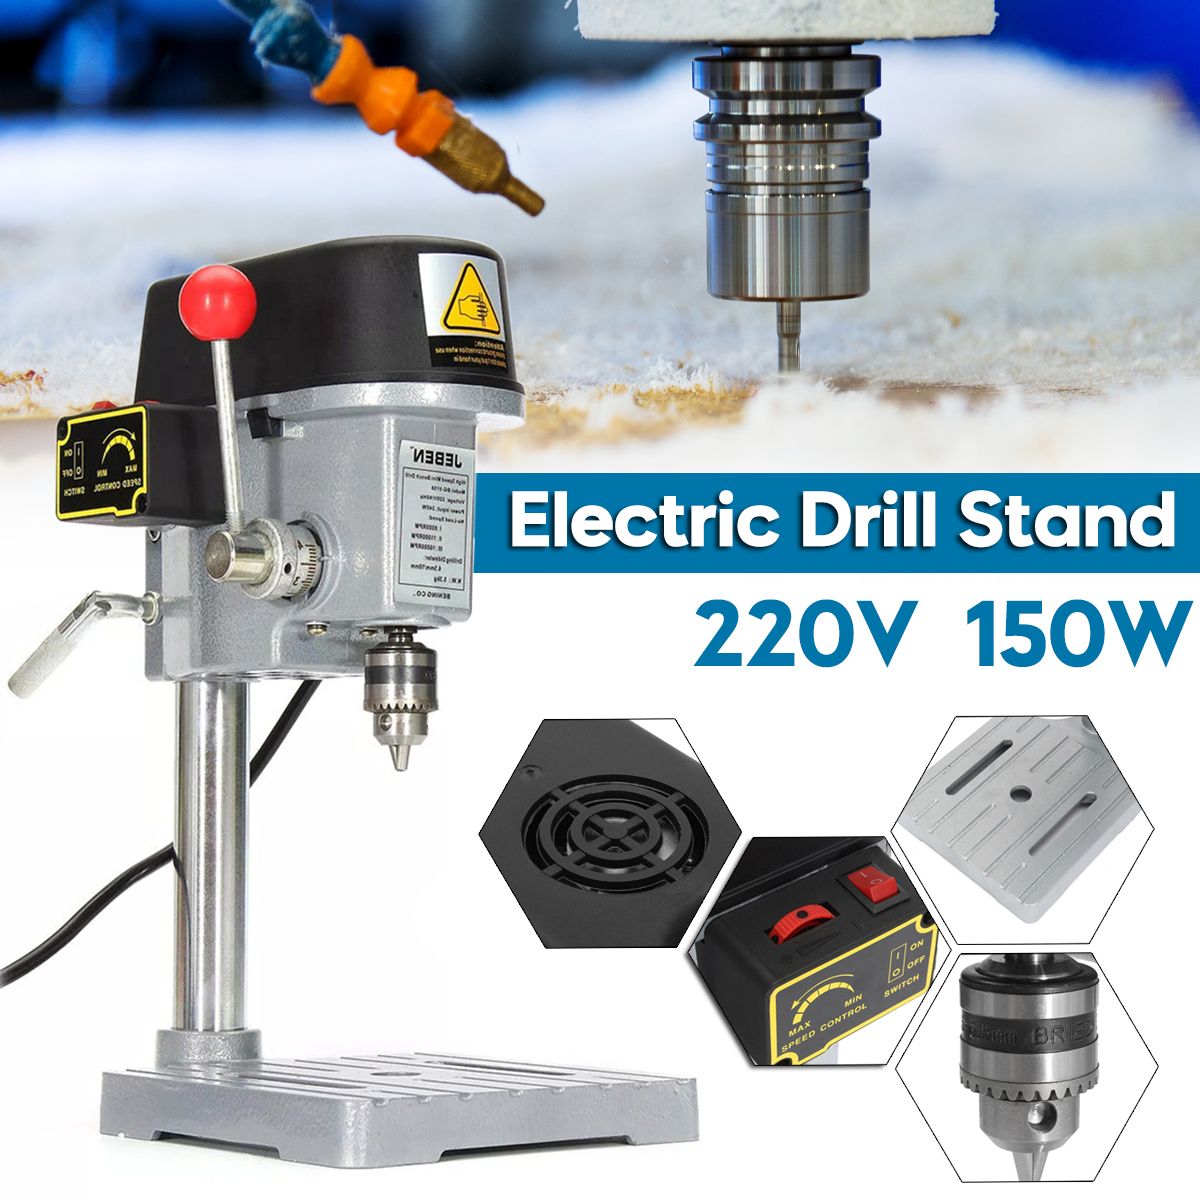 150W-Electric-Bench-Drill-Compact-variable-speed-Bench-mini-hobby-0--7000-rpm-Drill-Press-1764458